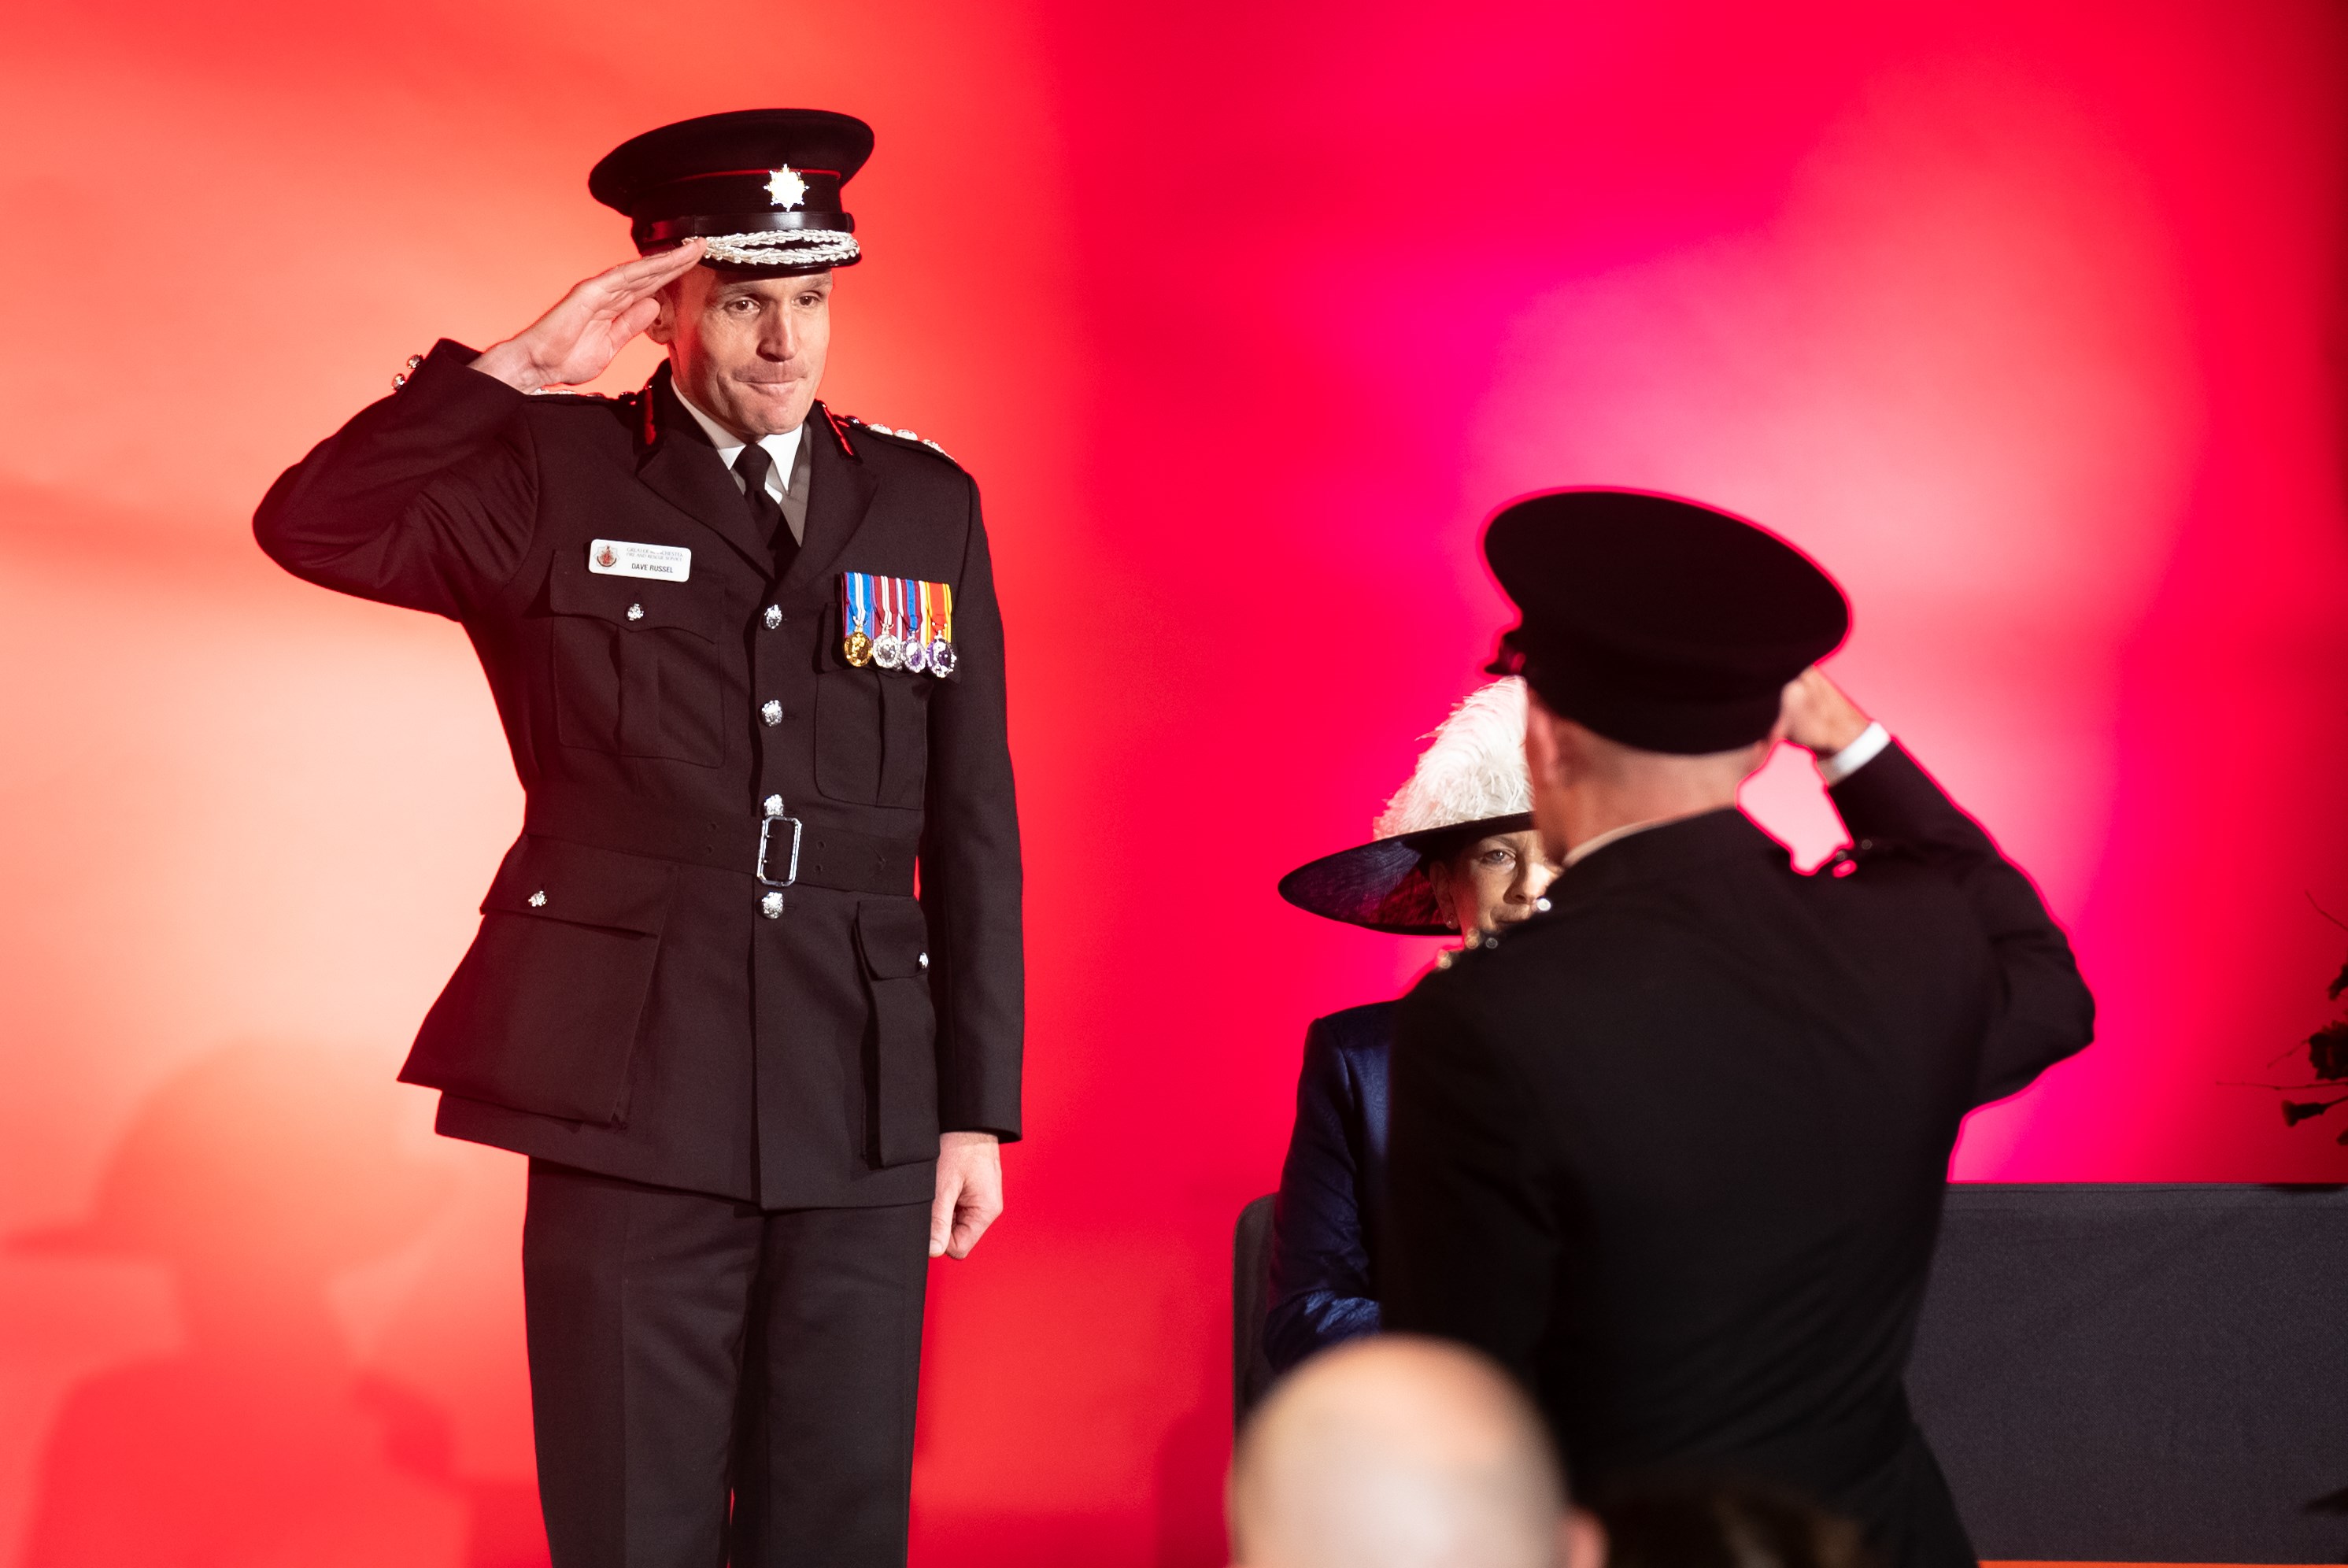 Chief Fire Officer, Dave Russel saluting an award recipient who is saluting back to him on stage at the Long Service Good Conduct award ceremonies.